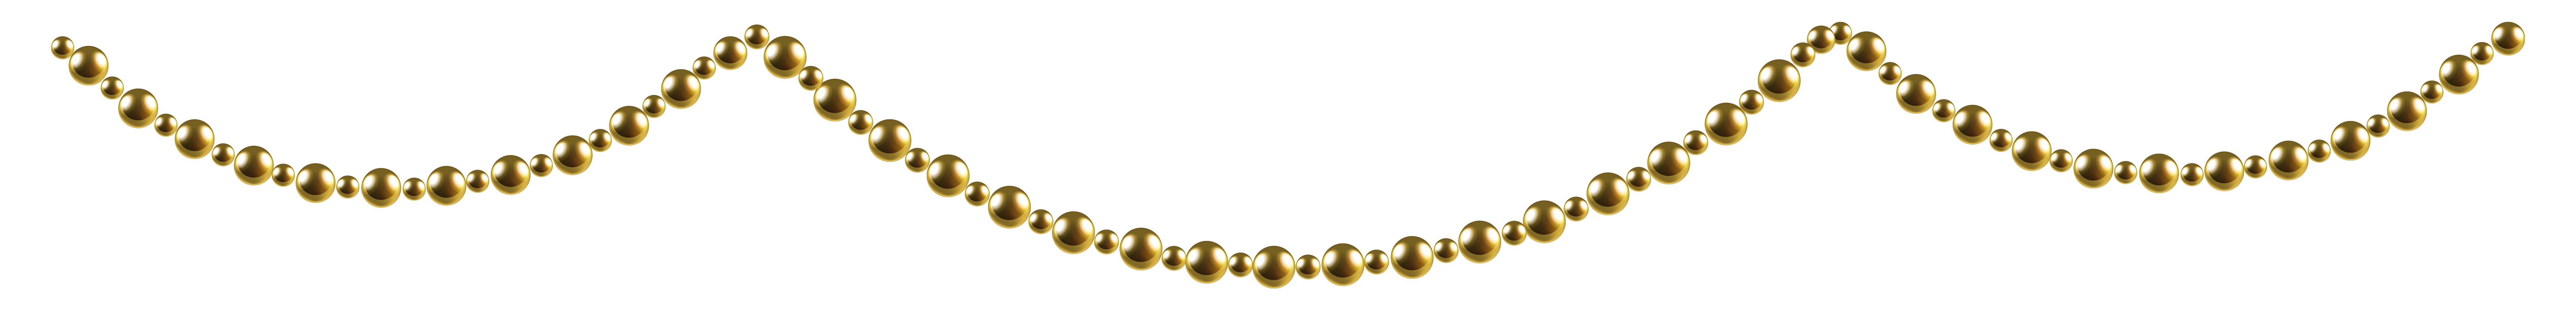 Gold Garland PNG Clip Art Image | Gallery Yopriceville ...